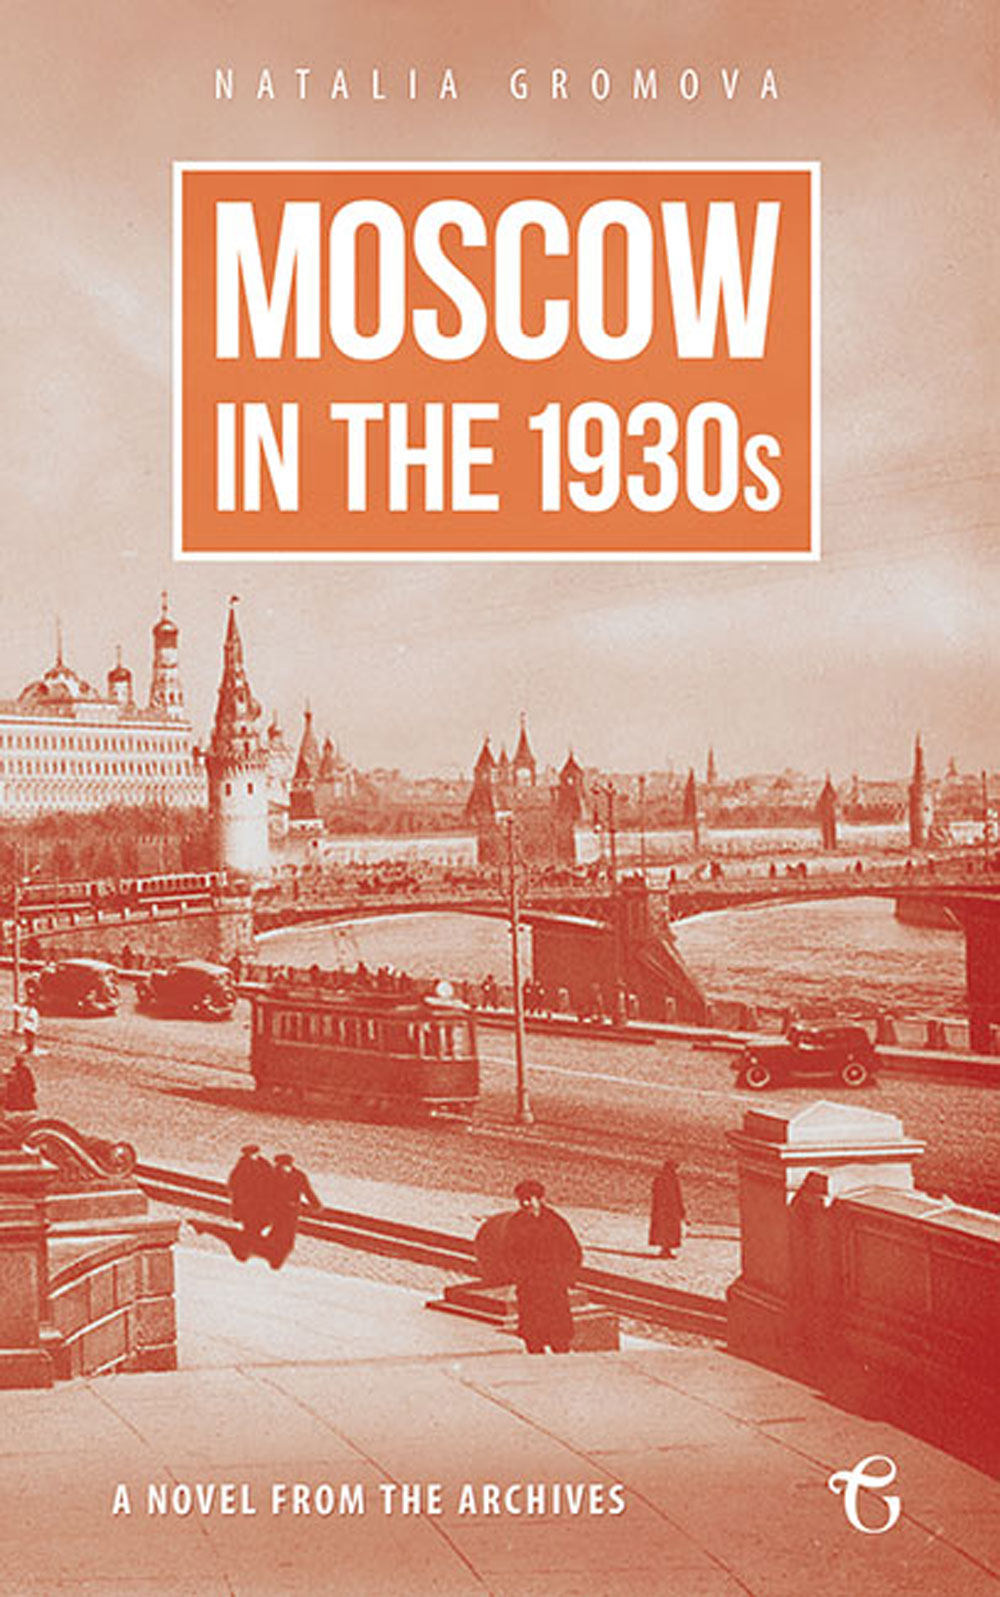 New novel reveals the bygone Stalinist Moscow 